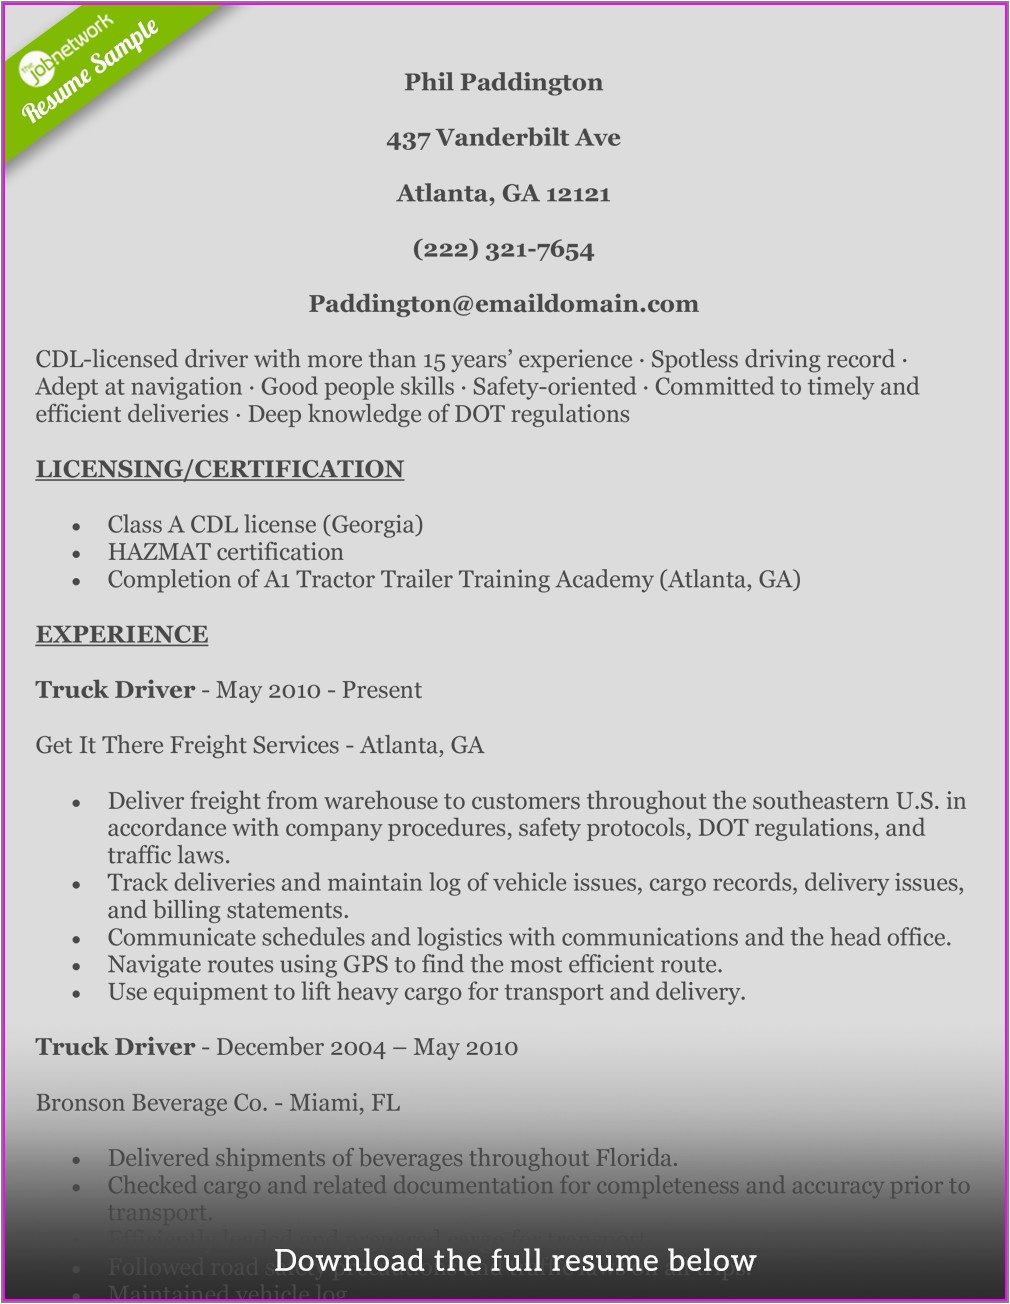 Sample Resume for Truck Driver with No Experience Resume for Truck Driver with No Experience Resume